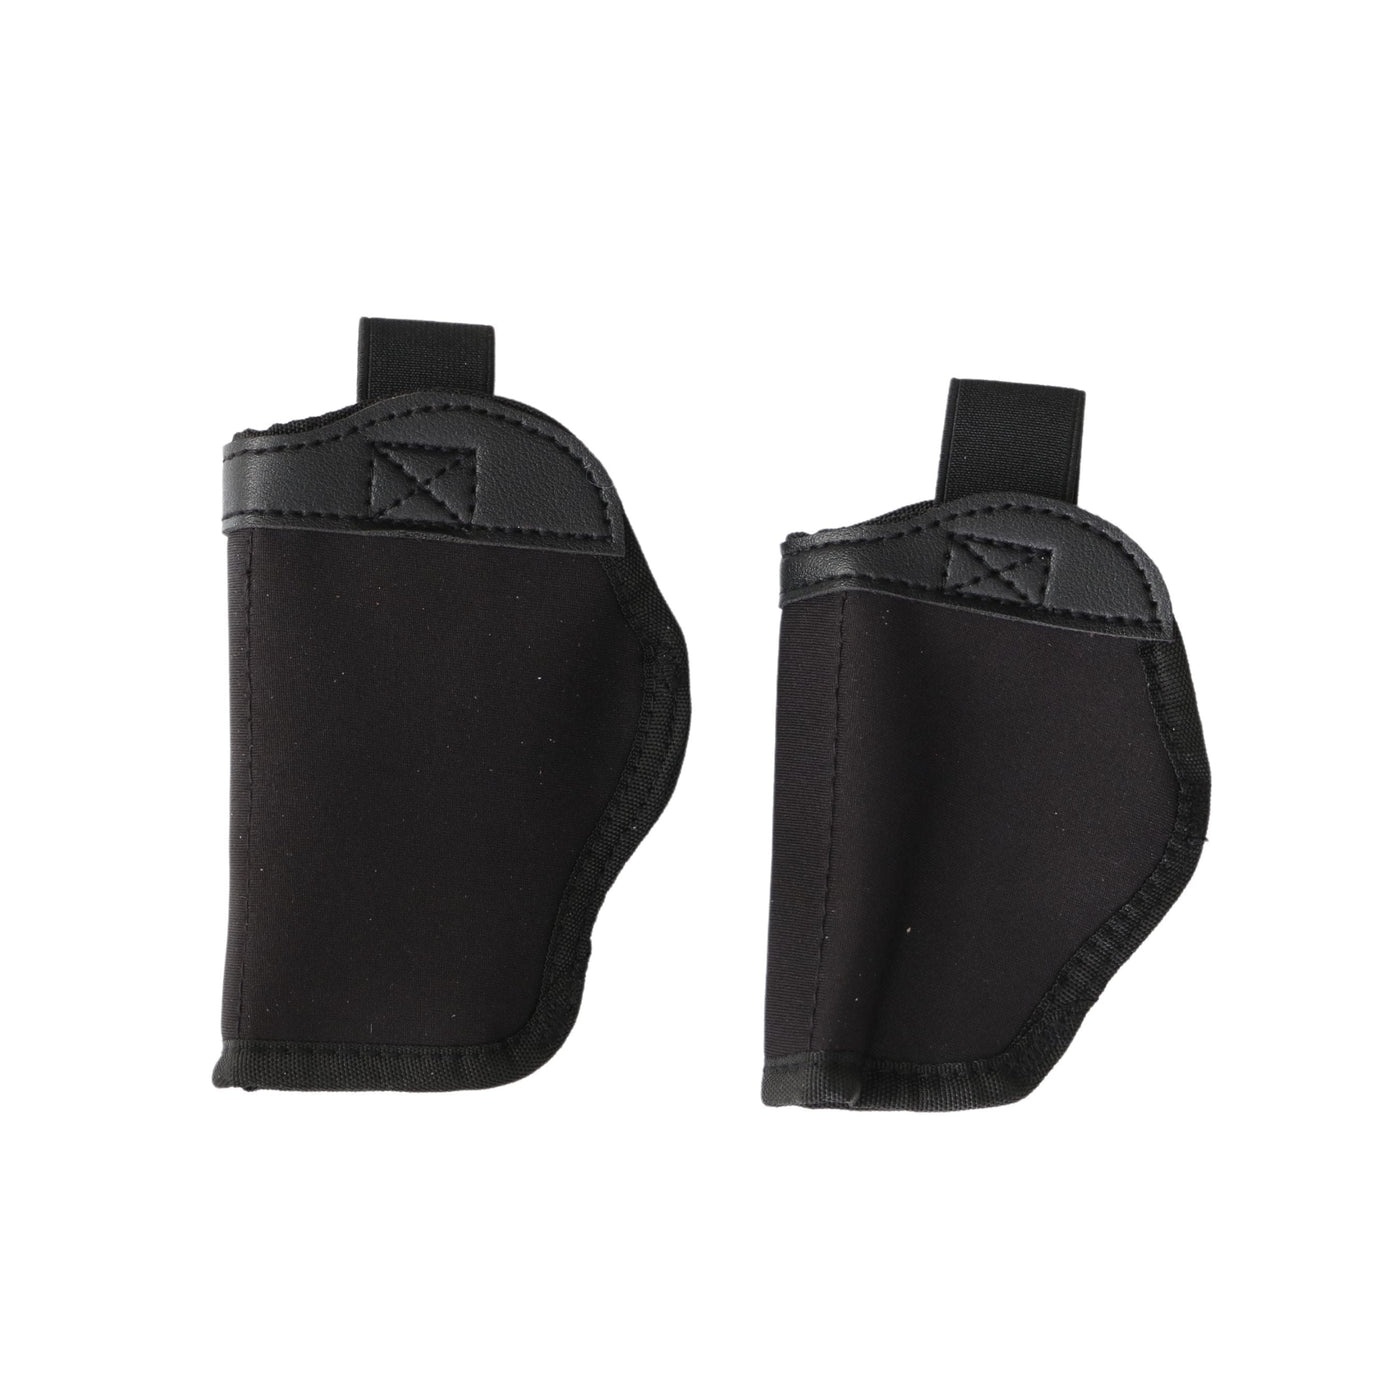 Soft Neoprene Inside Waistband Holster by DS Conceal -  DS Conceal gun case -  Discreet Conceal Carry -  leather gun case -  beautifull gun case -  soft leather gun case -  Holster for Glock or Pistol